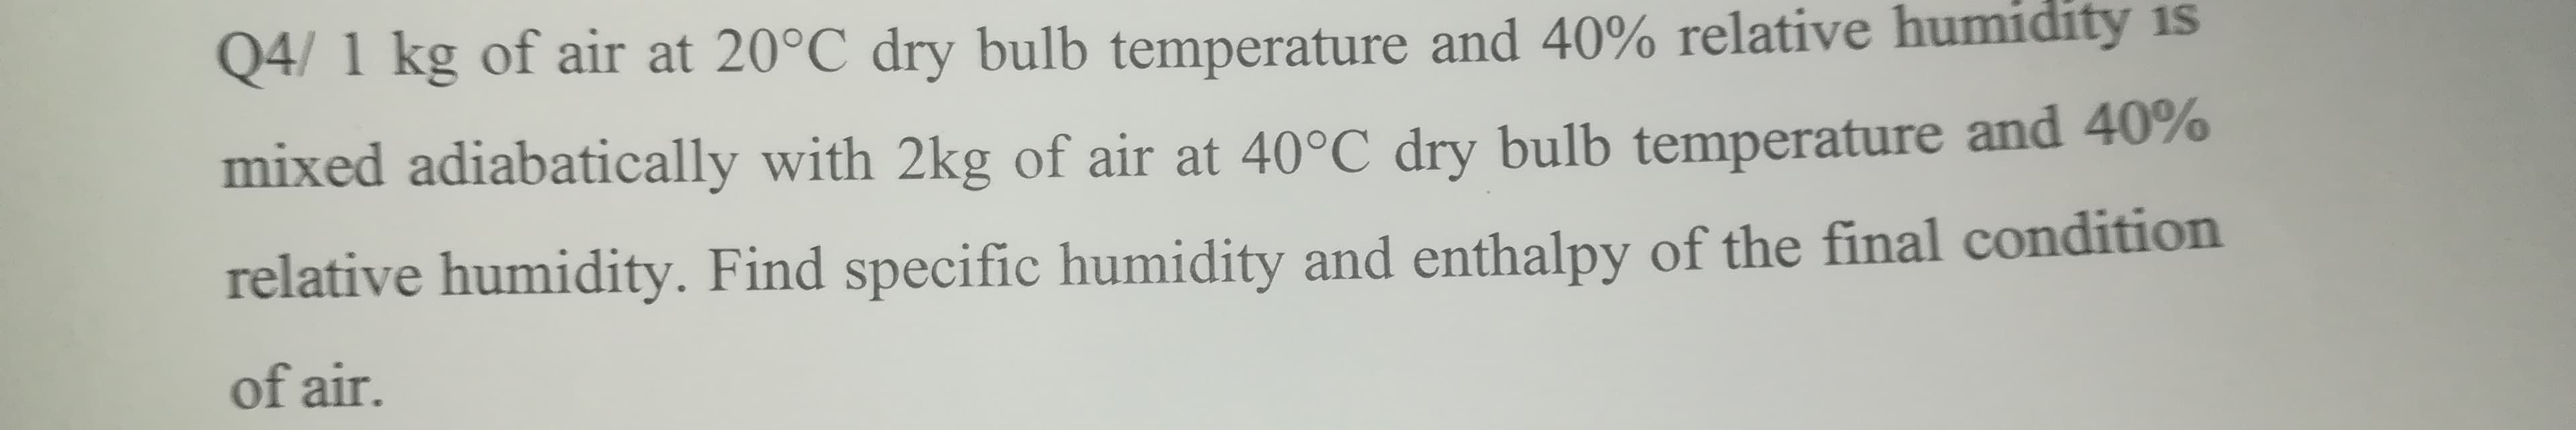 Q4/ 1 kg of air at 20°C dry bulb temperature and 40% relative humidity is
mixed adiabatically with 2kg of air at 40°C dry bulb temperature and 40%
relative humidity. Find specific humidity and enthalpy of the final condition
of air.
